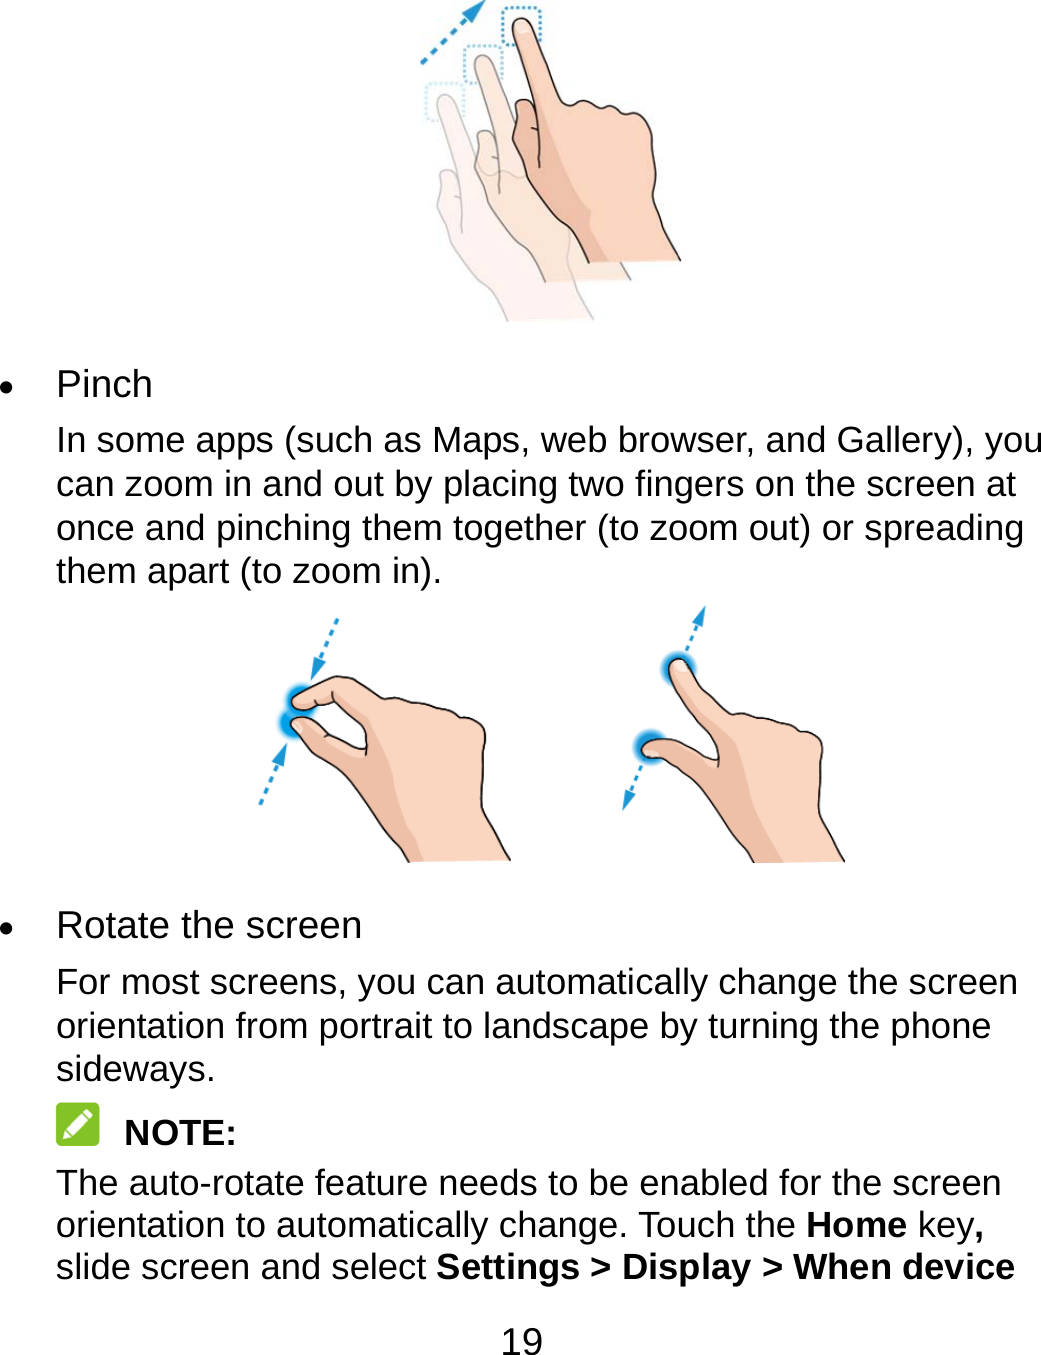 19   Pinch In some apps (such as Maps, web browser, and Gallery), you can zoom in and out by placing two fingers on the screen at once and pinching them together (to zoom out) or spreading them apart (to zoom in).          Rotate the screen For most screens, you can automatically change the screen orientation from portrait to landscape by turning the phone sideways.  NOTE: The auto-rotate feature needs to be enabled for the screen orientation to automatically change. Touch the Home key, slide screen and select Settings &gt; Display &gt; When device 